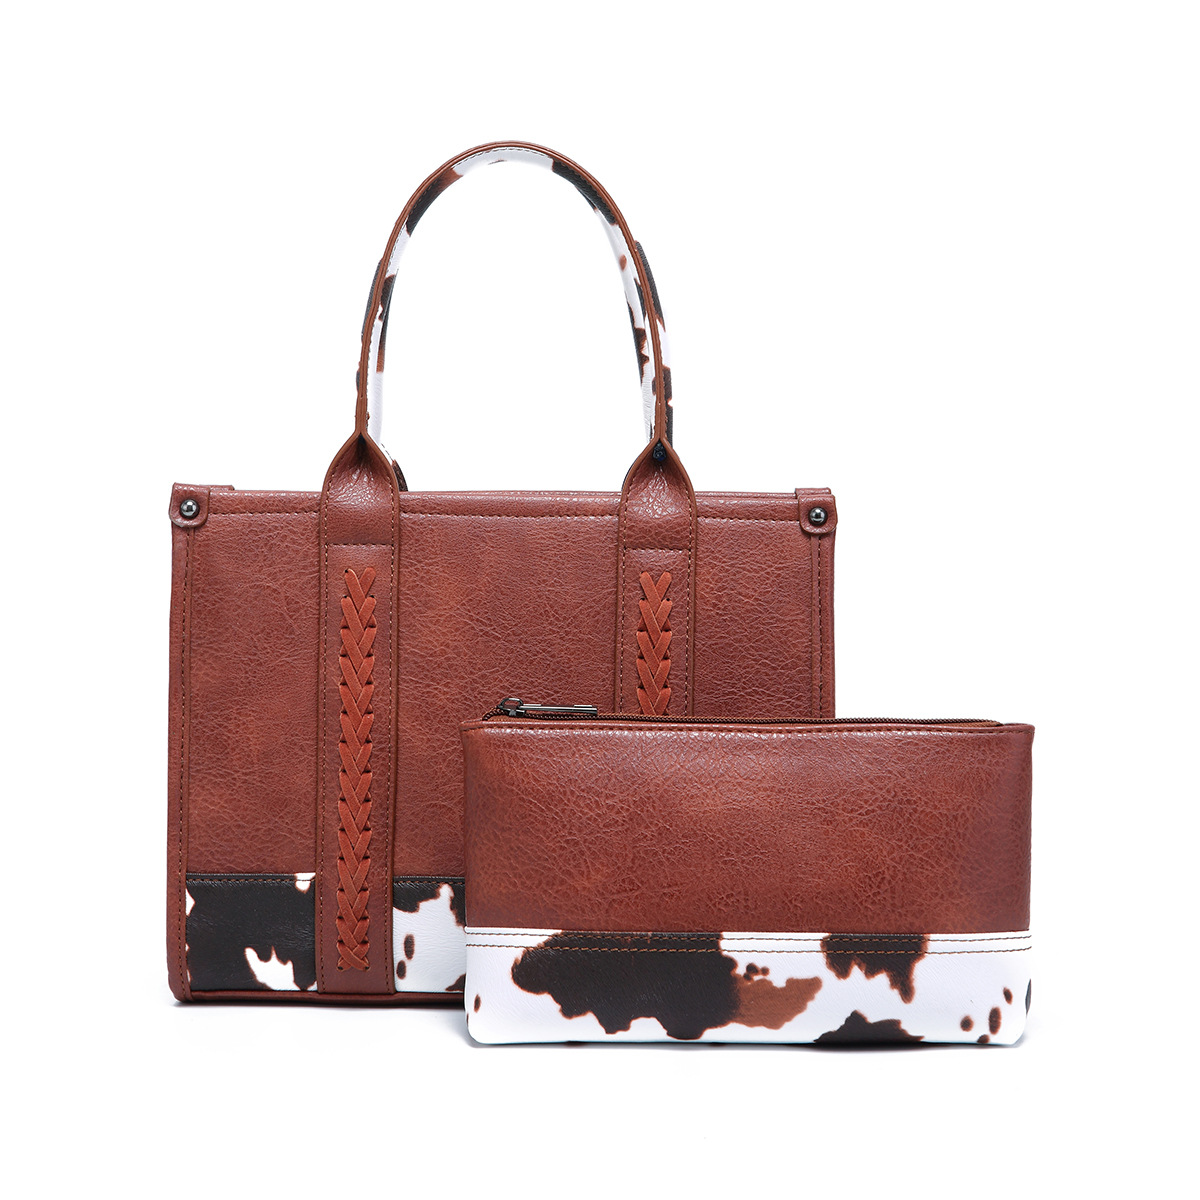 PG5020 Brown and Clutch bag